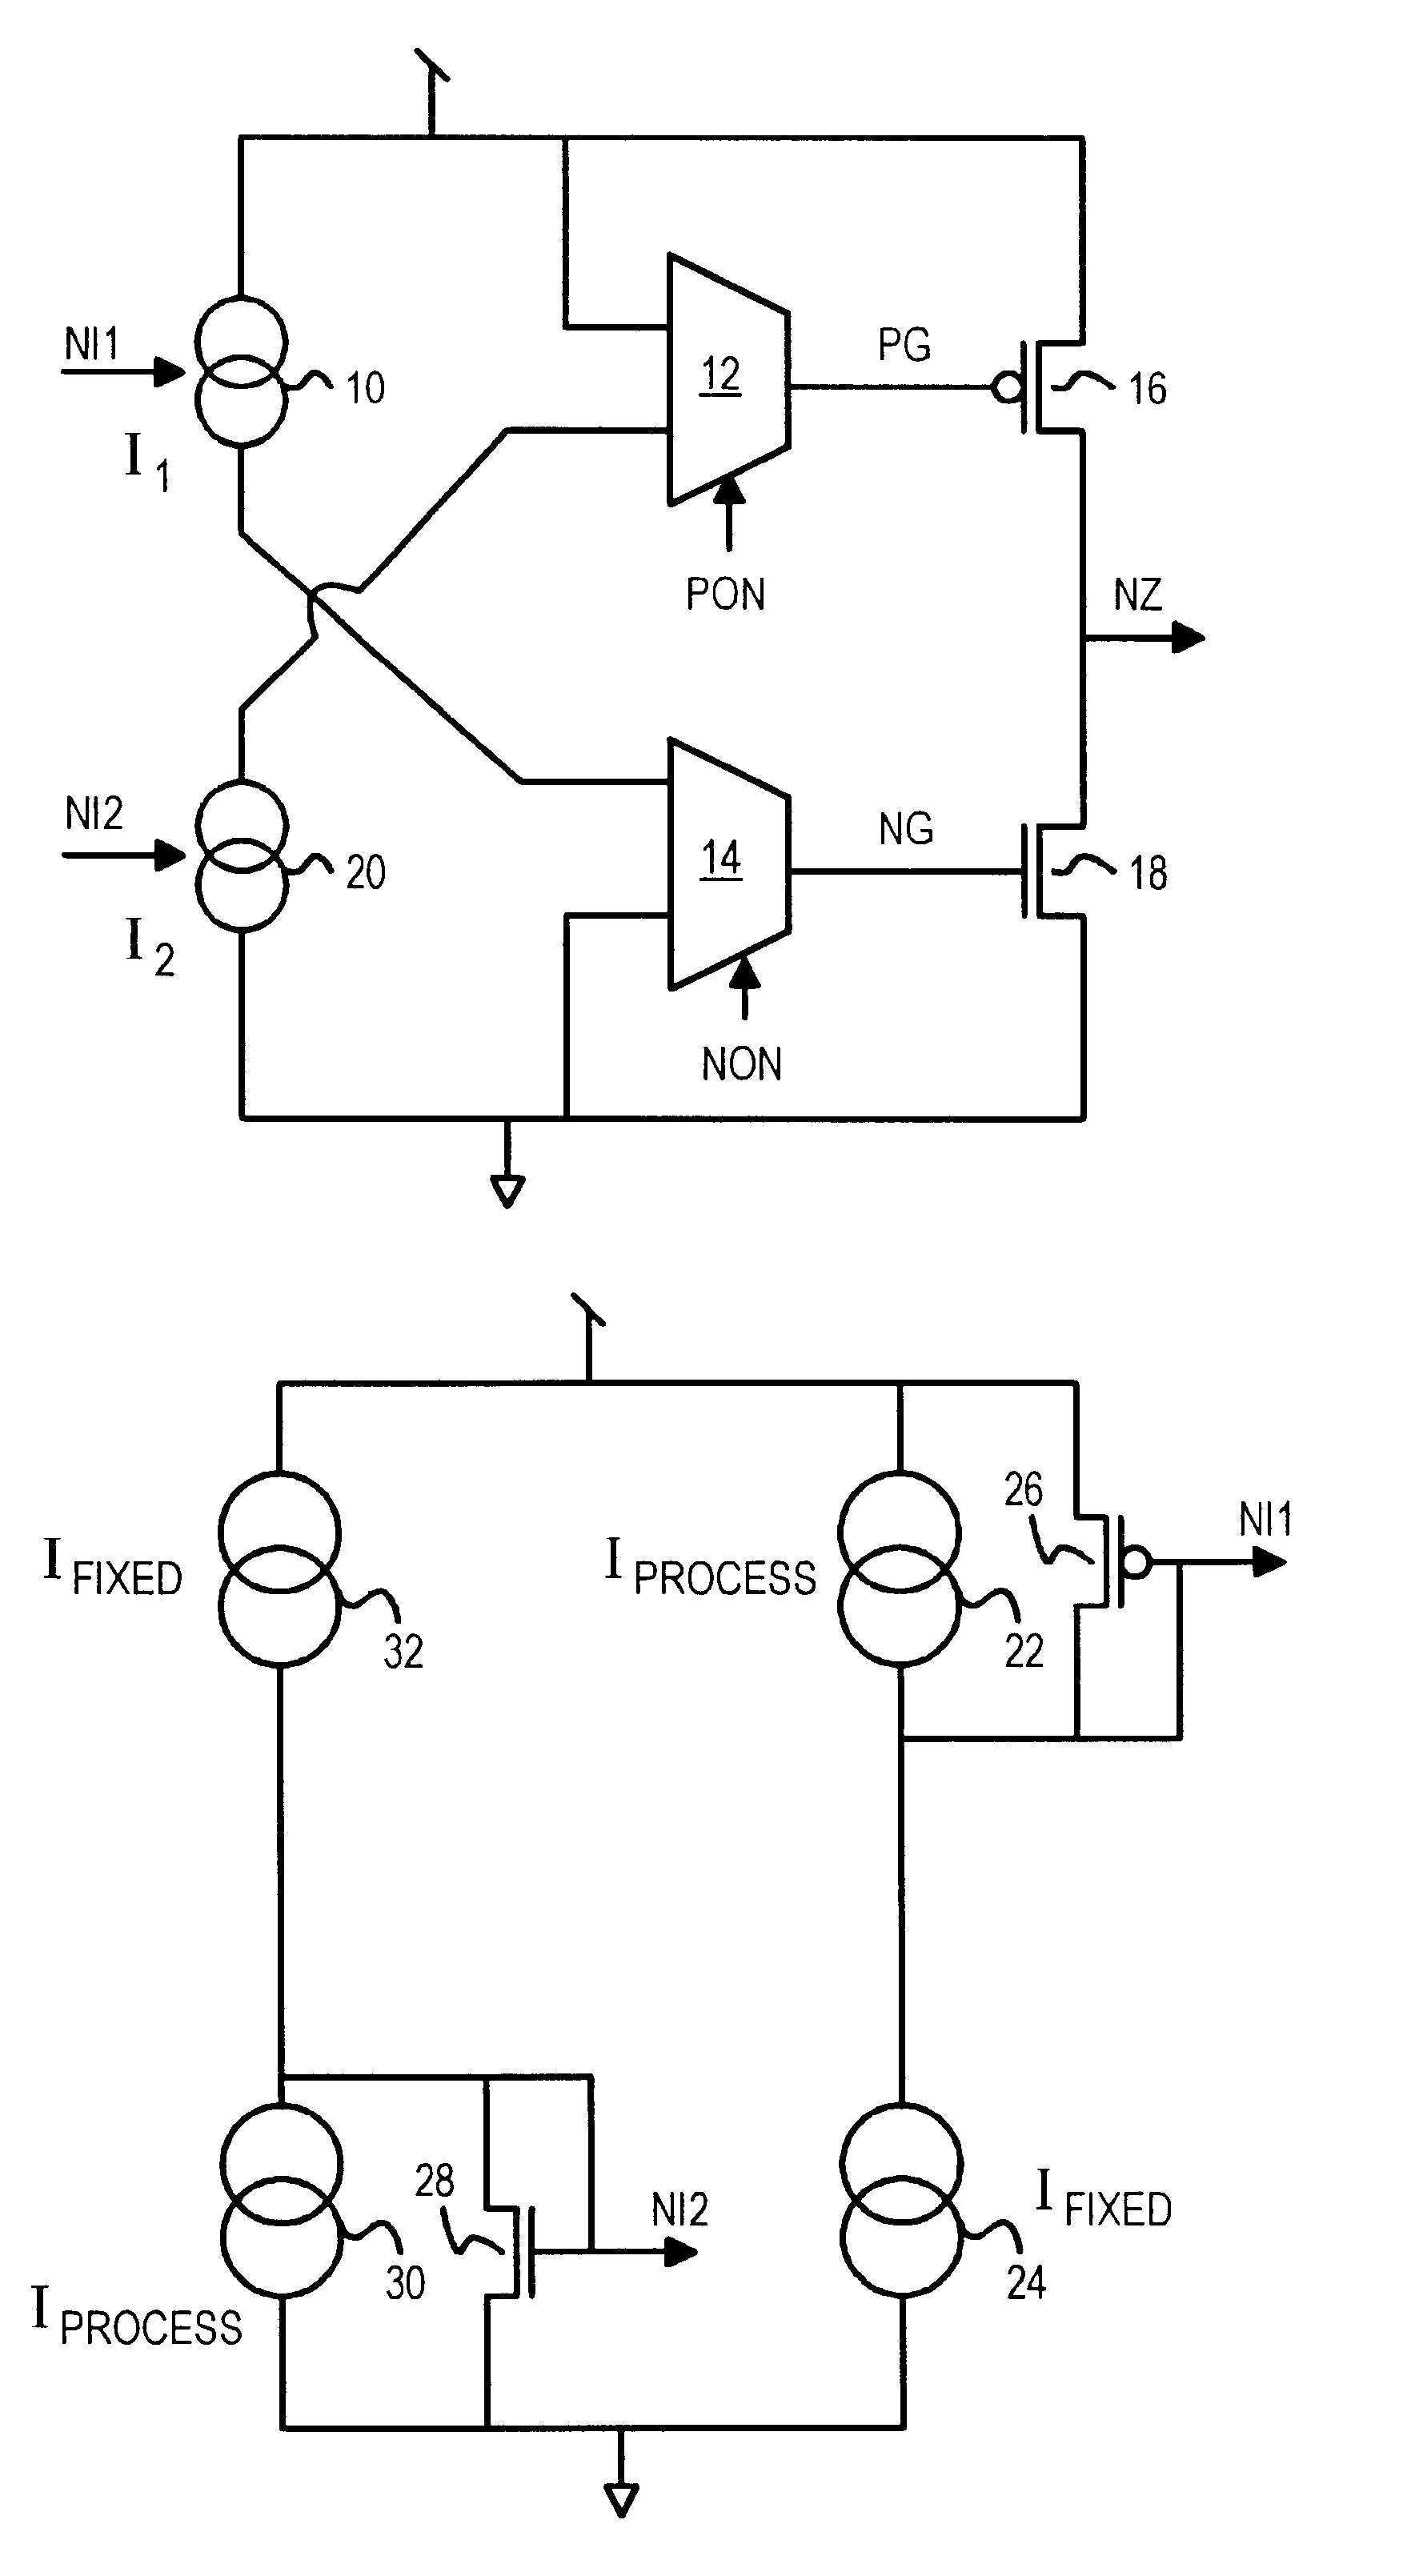 Current-compensated CMOS output buffer adjusting edge rate for process, temperature, and Vcc variations